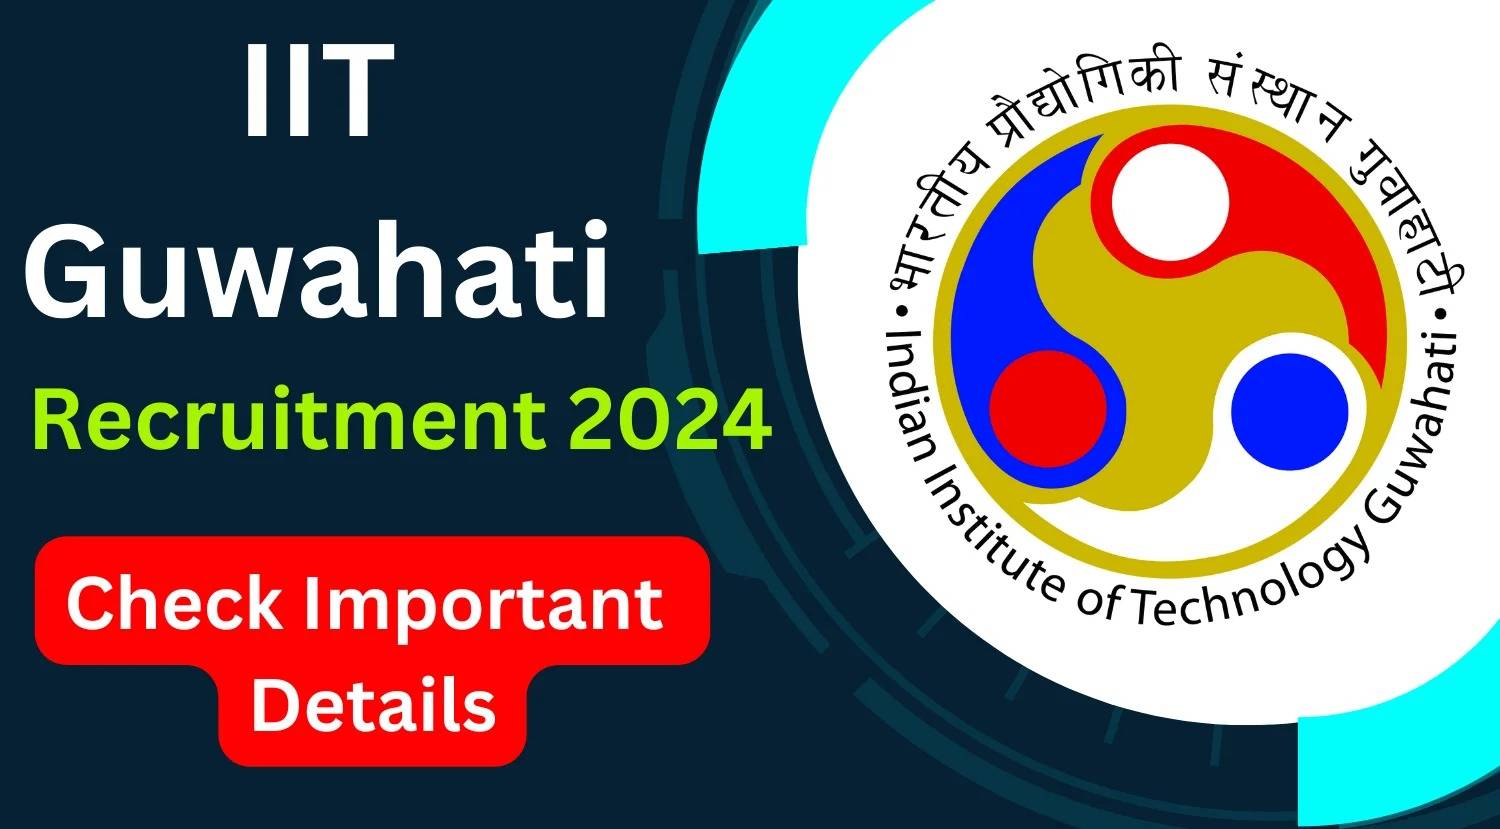 IIT Guwahati Announces Recruitment 2024: Monthly Salary Details, Selection Criteria, and How to Apply